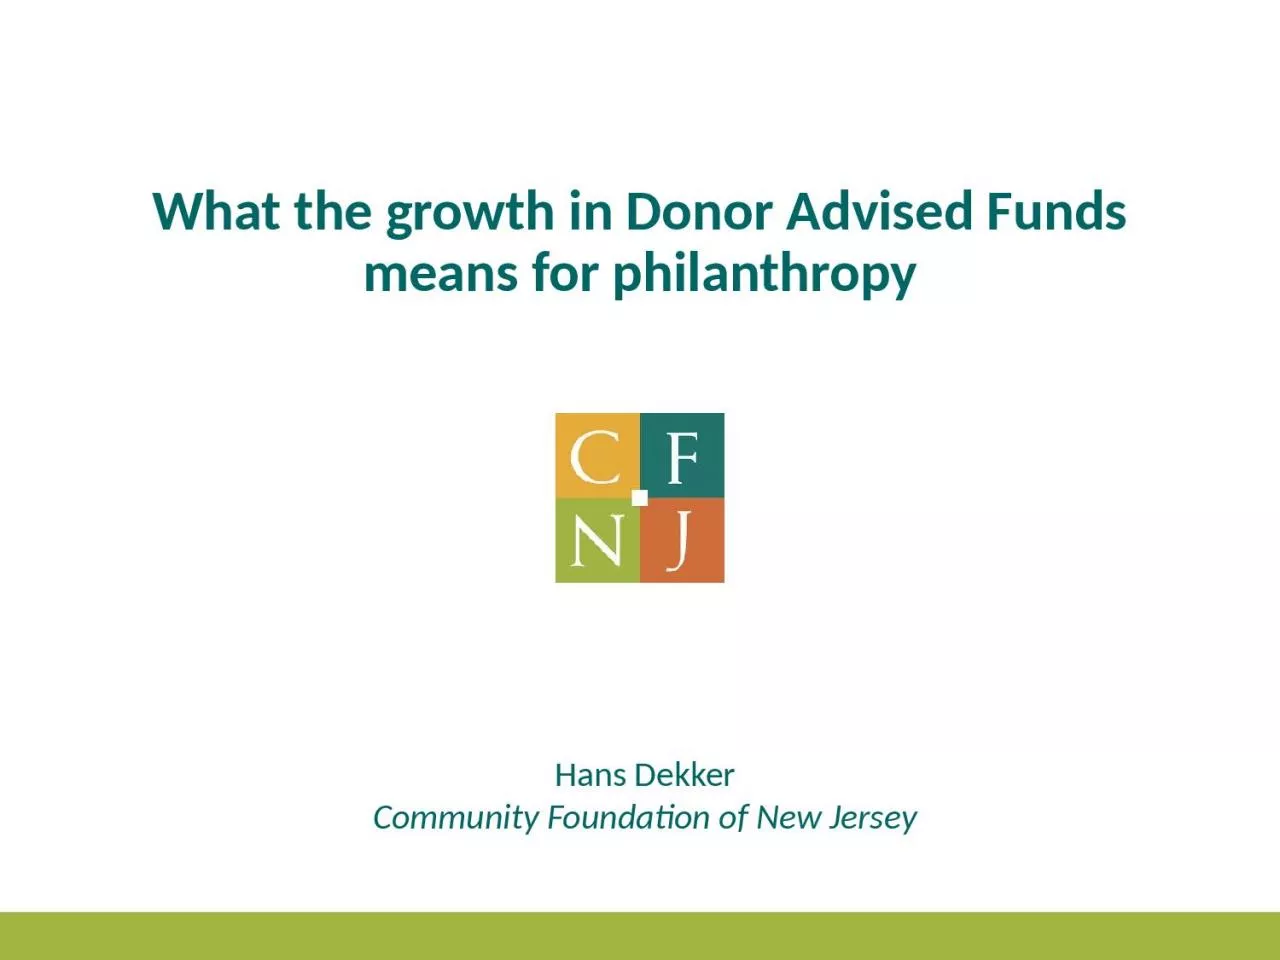 What the growth in Donor Advised Funds means for philanthropy